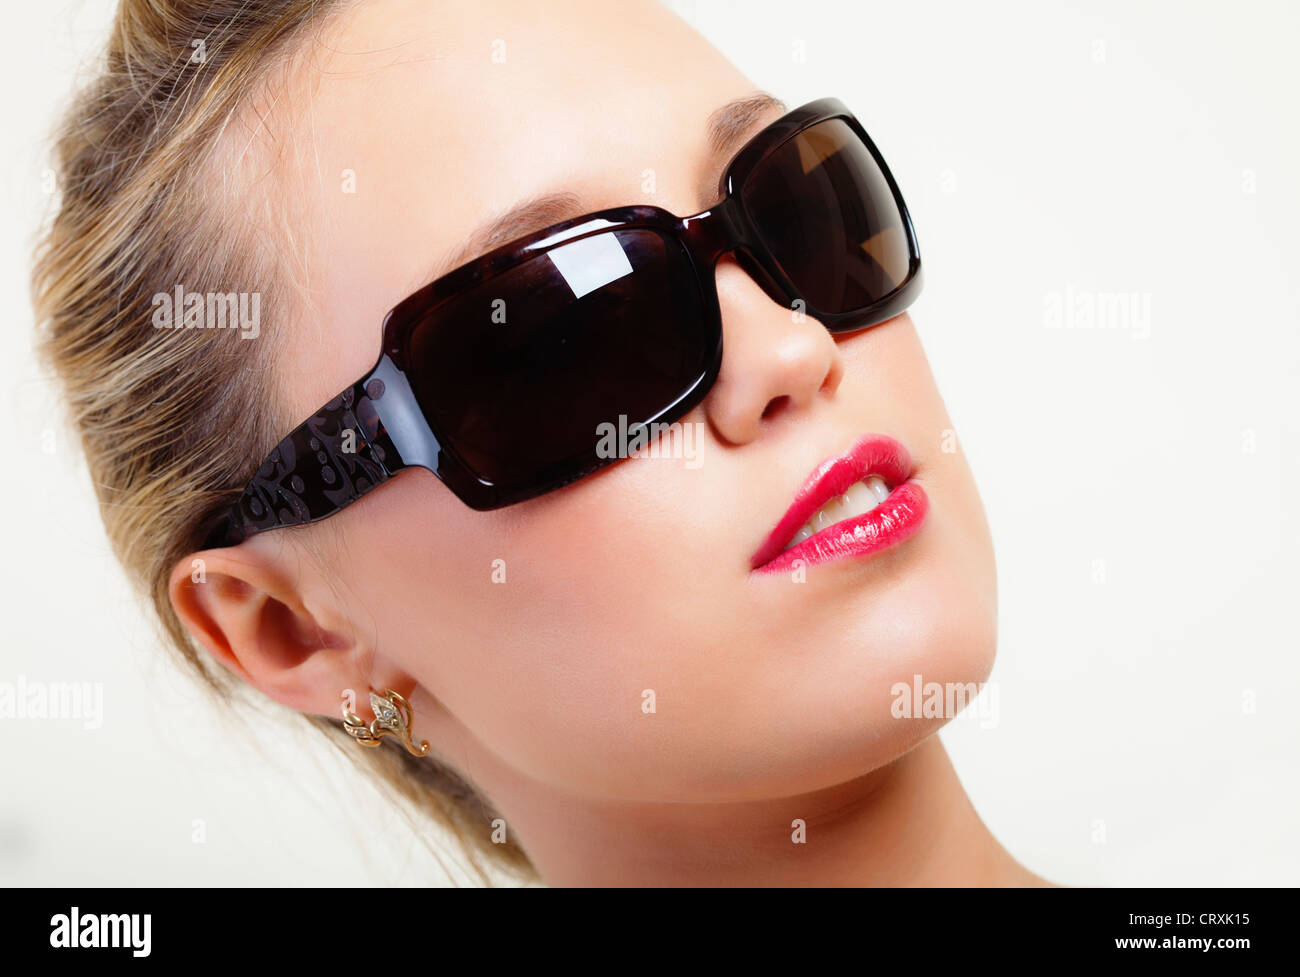 Portrait of brightly lit beautiful young woman in sunglasses Stock Photo